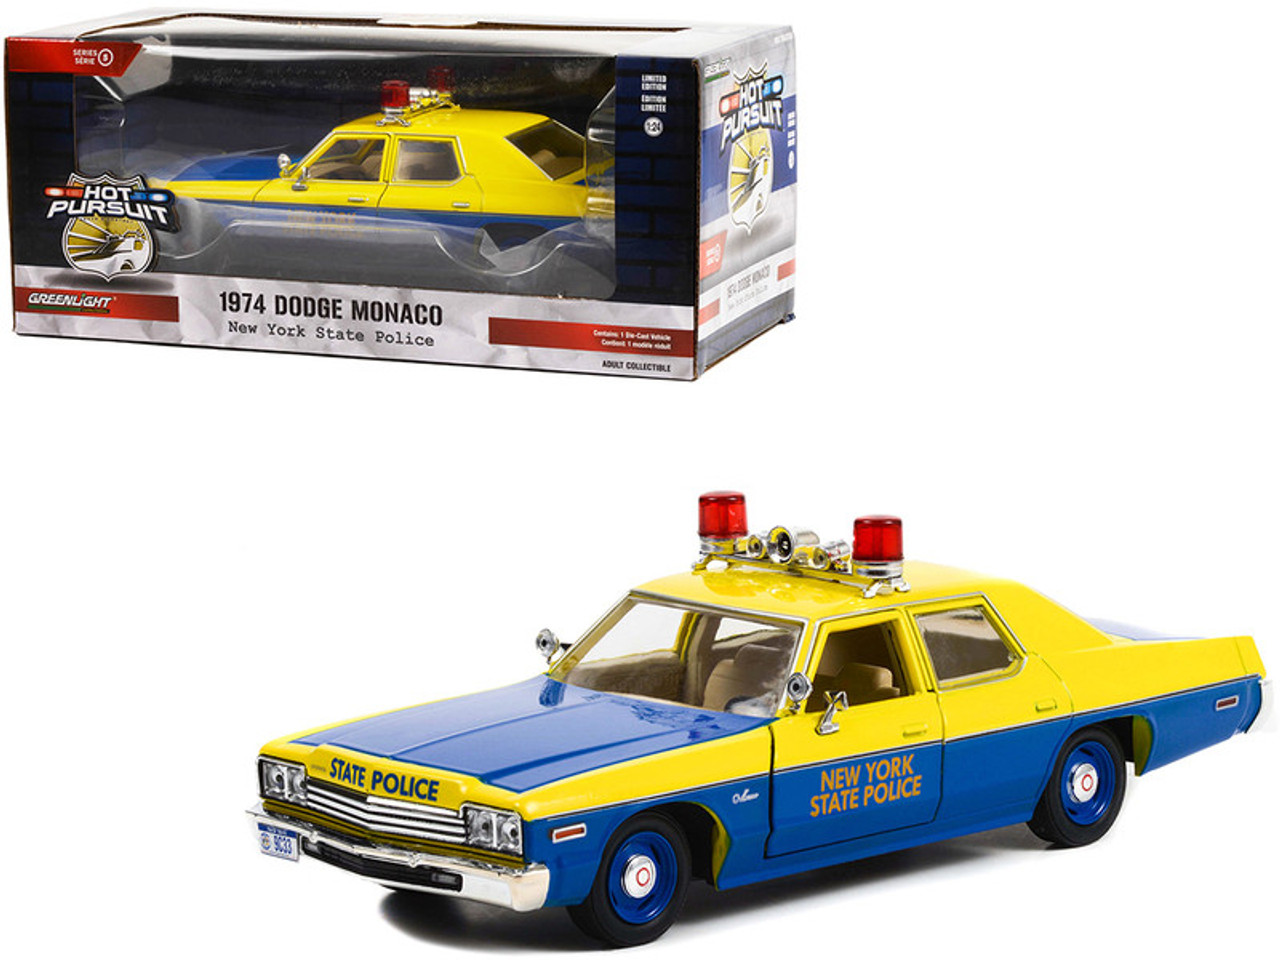 1974 Dodge Monaco Blue and Yellow "New York State Police" "Hot Pursuit" Series 1/24 Diecast Model Car by Greenlight